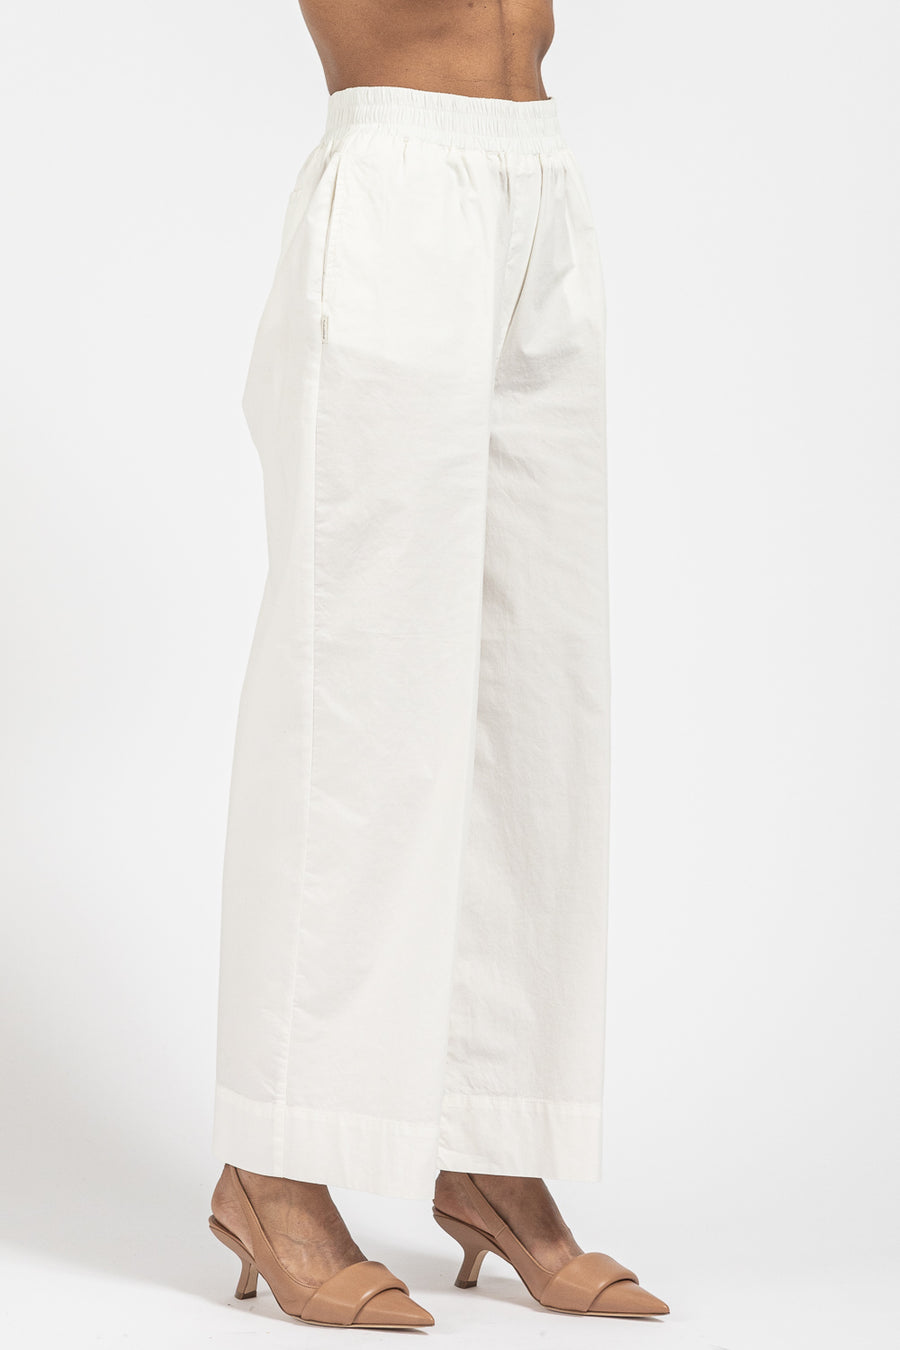 Pantalone True NYC in cotone color ivory baloon